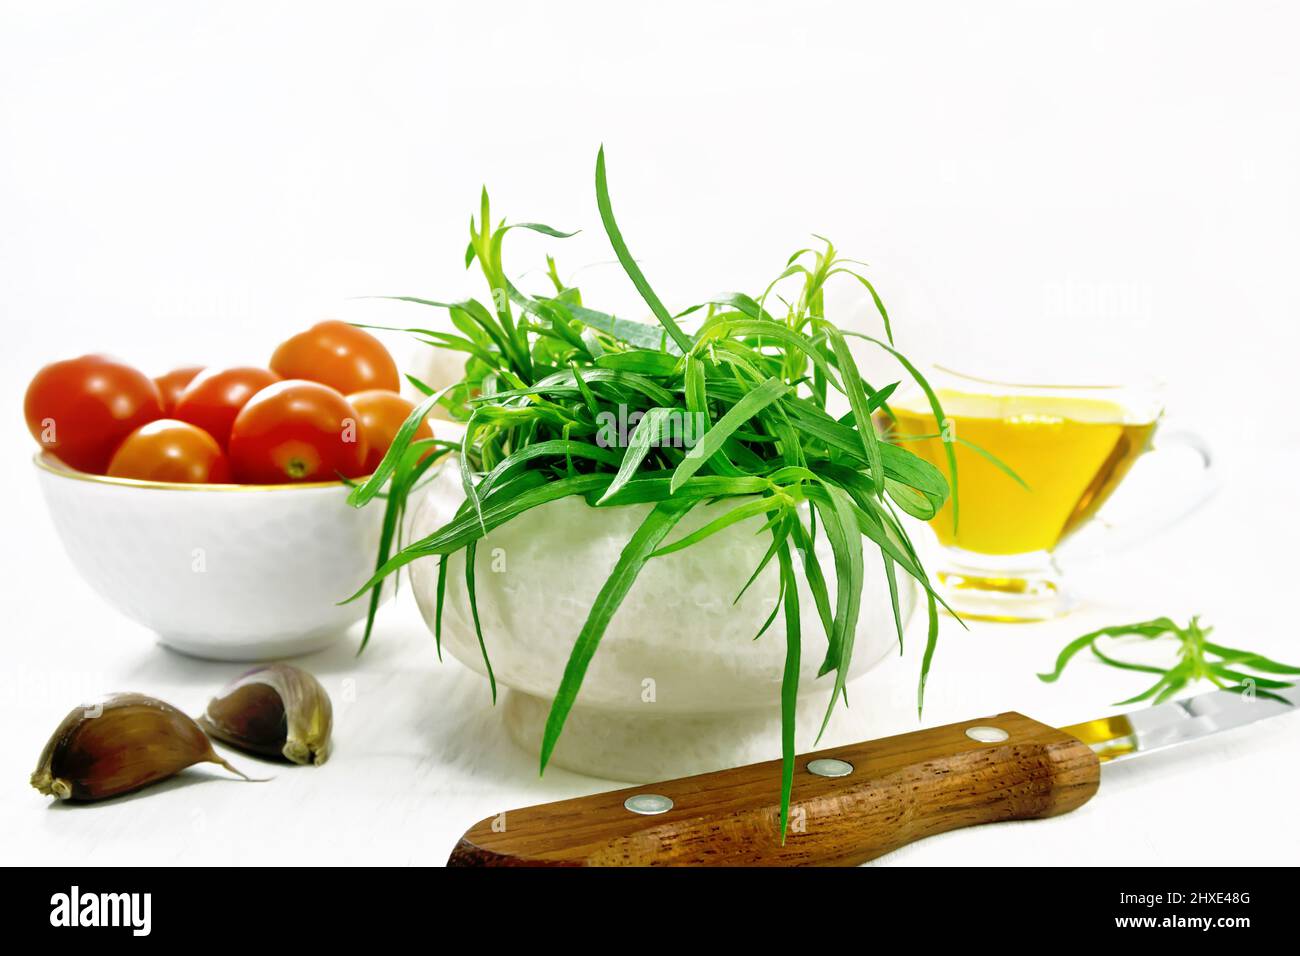 Fresh tarragon in a mortar, tomatoes and champignons in bowls, vegetable oil in gravy boat, garlic cloves and a knife on light wooden board background Stock Photo